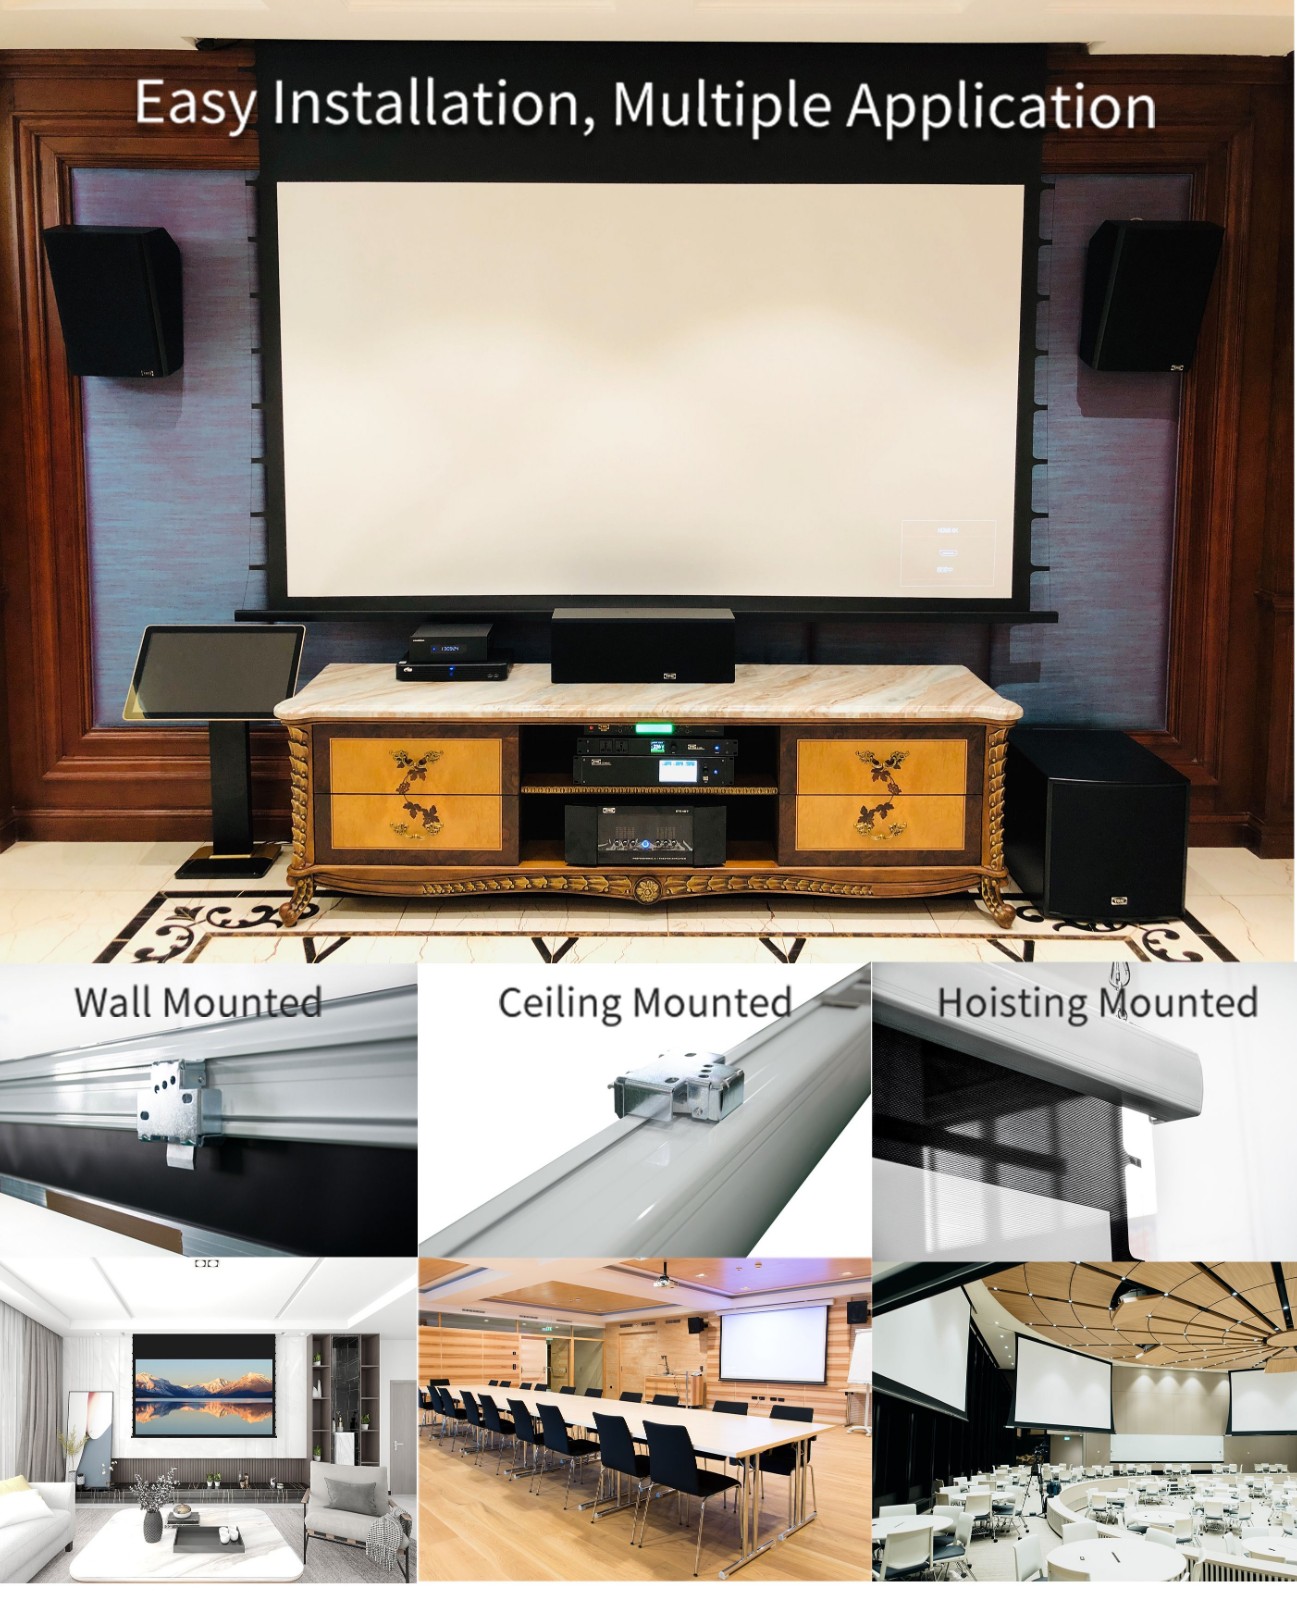 inceiling fixed projector screen design for living room-8